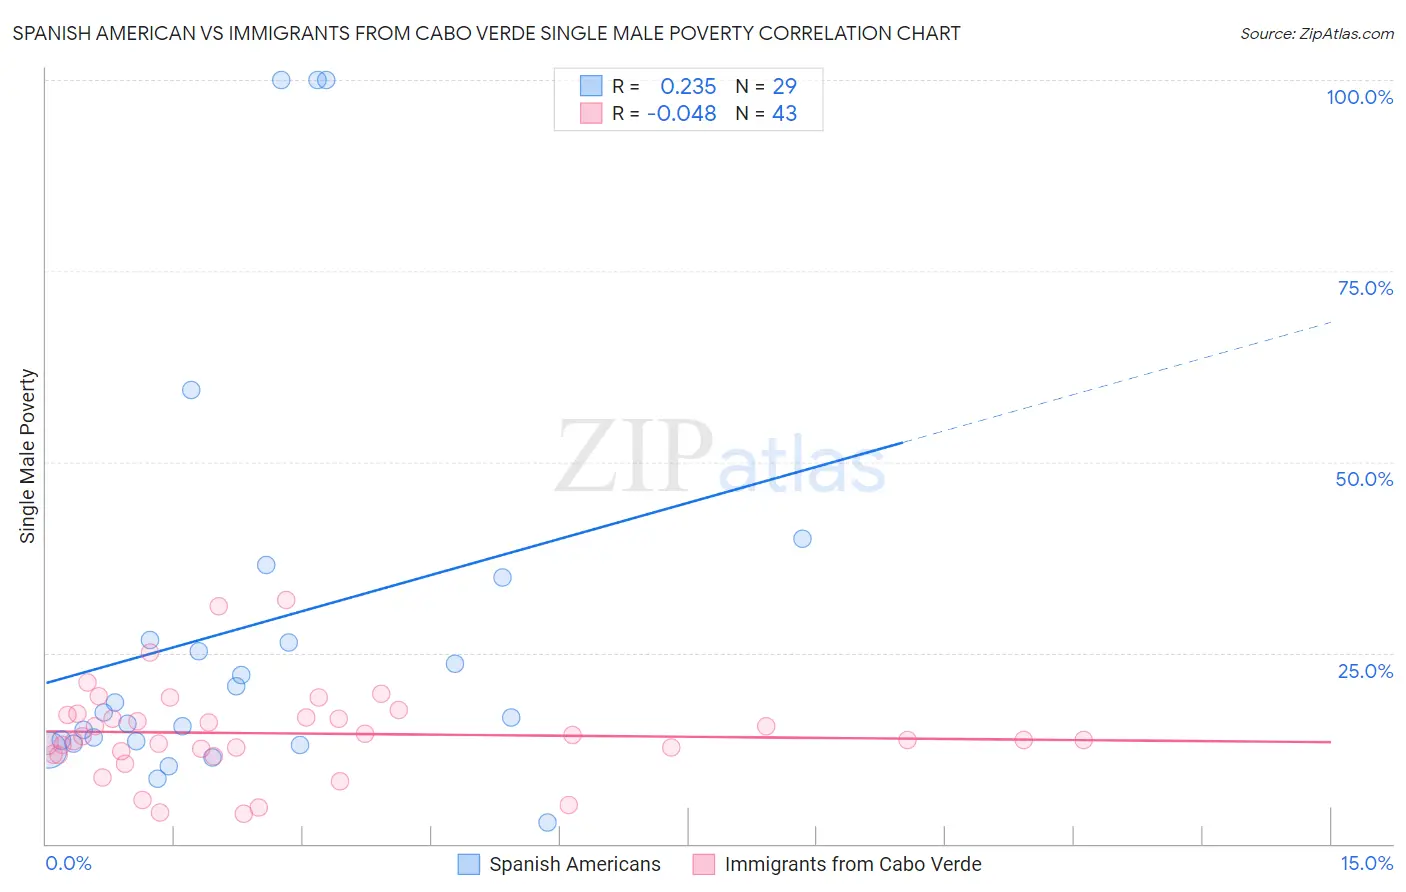 Spanish American vs Immigrants from Cabo Verde Single Male Poverty